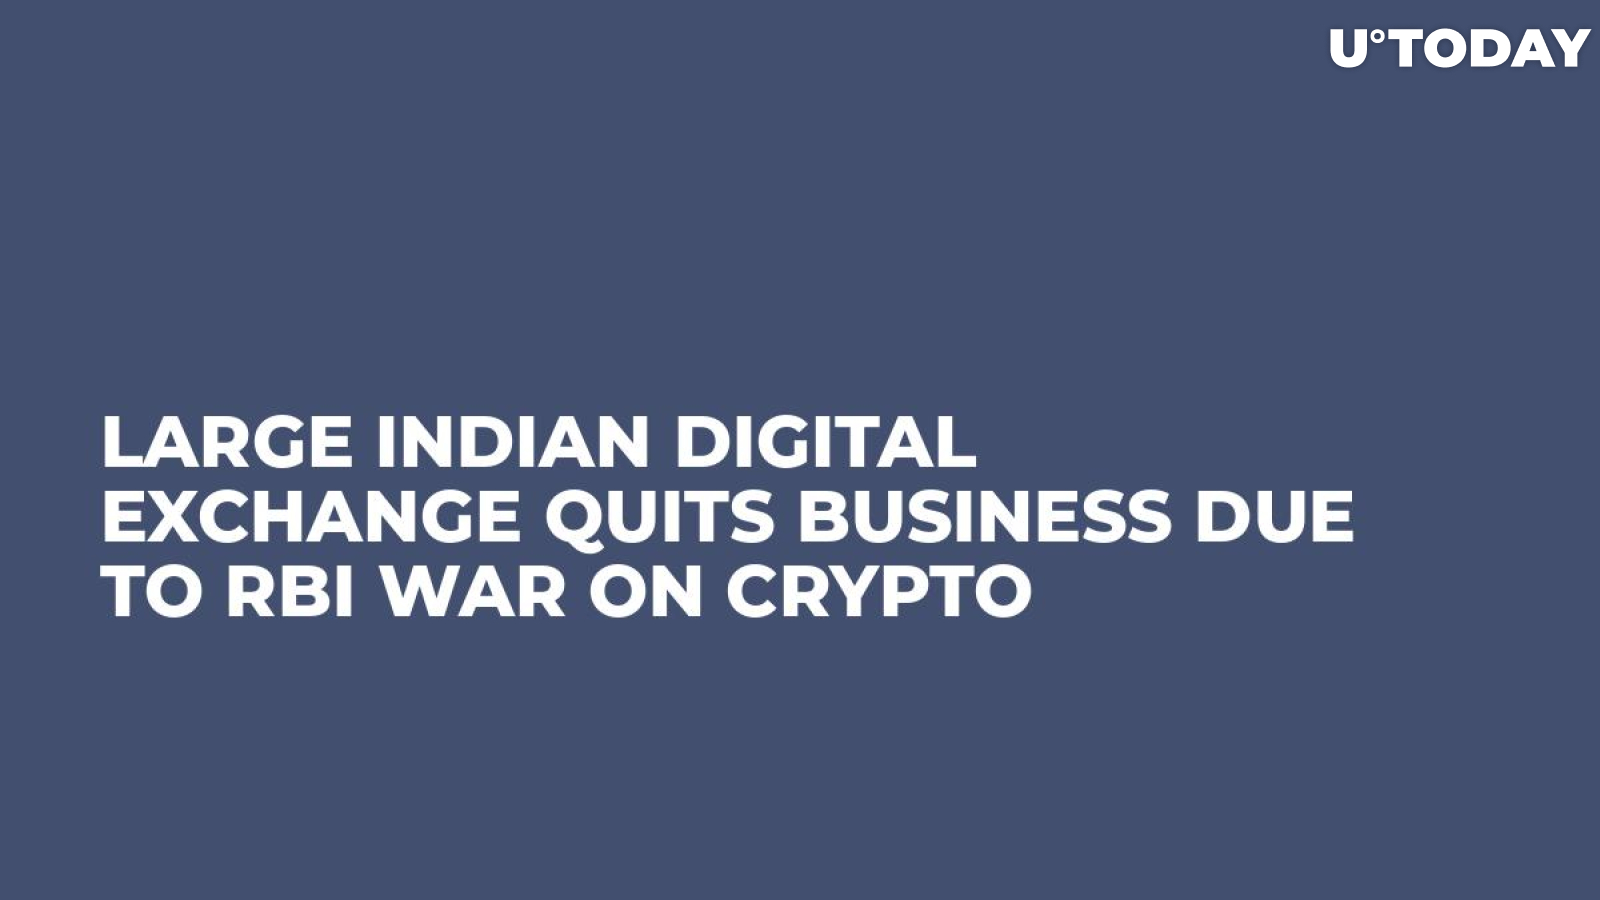 Large Indian Digital Exchange Quits Business Due to RBI War on Crypto